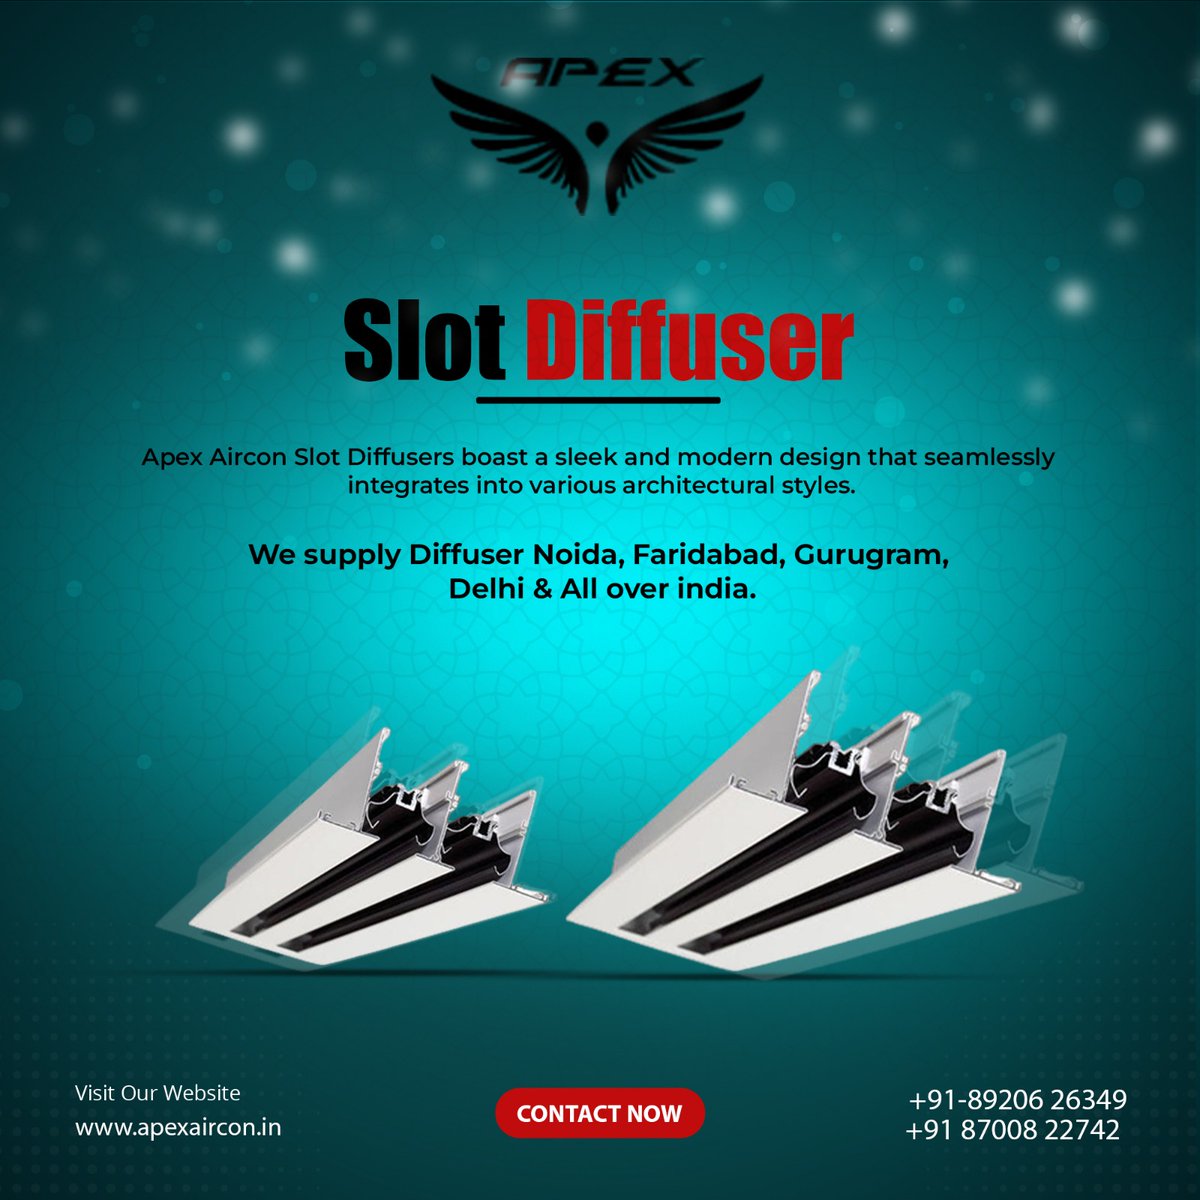 SLOT DIFFUSERS
Call Us:-+91-89206 26349, +91 87008 22742
Visit:-www.apexaircon.in
#diffuser #essentialoils #aromatherapy #essentialoil #youngliving #younglivingessentialoils #yleo #healthylifestyle #wellness #humidifier